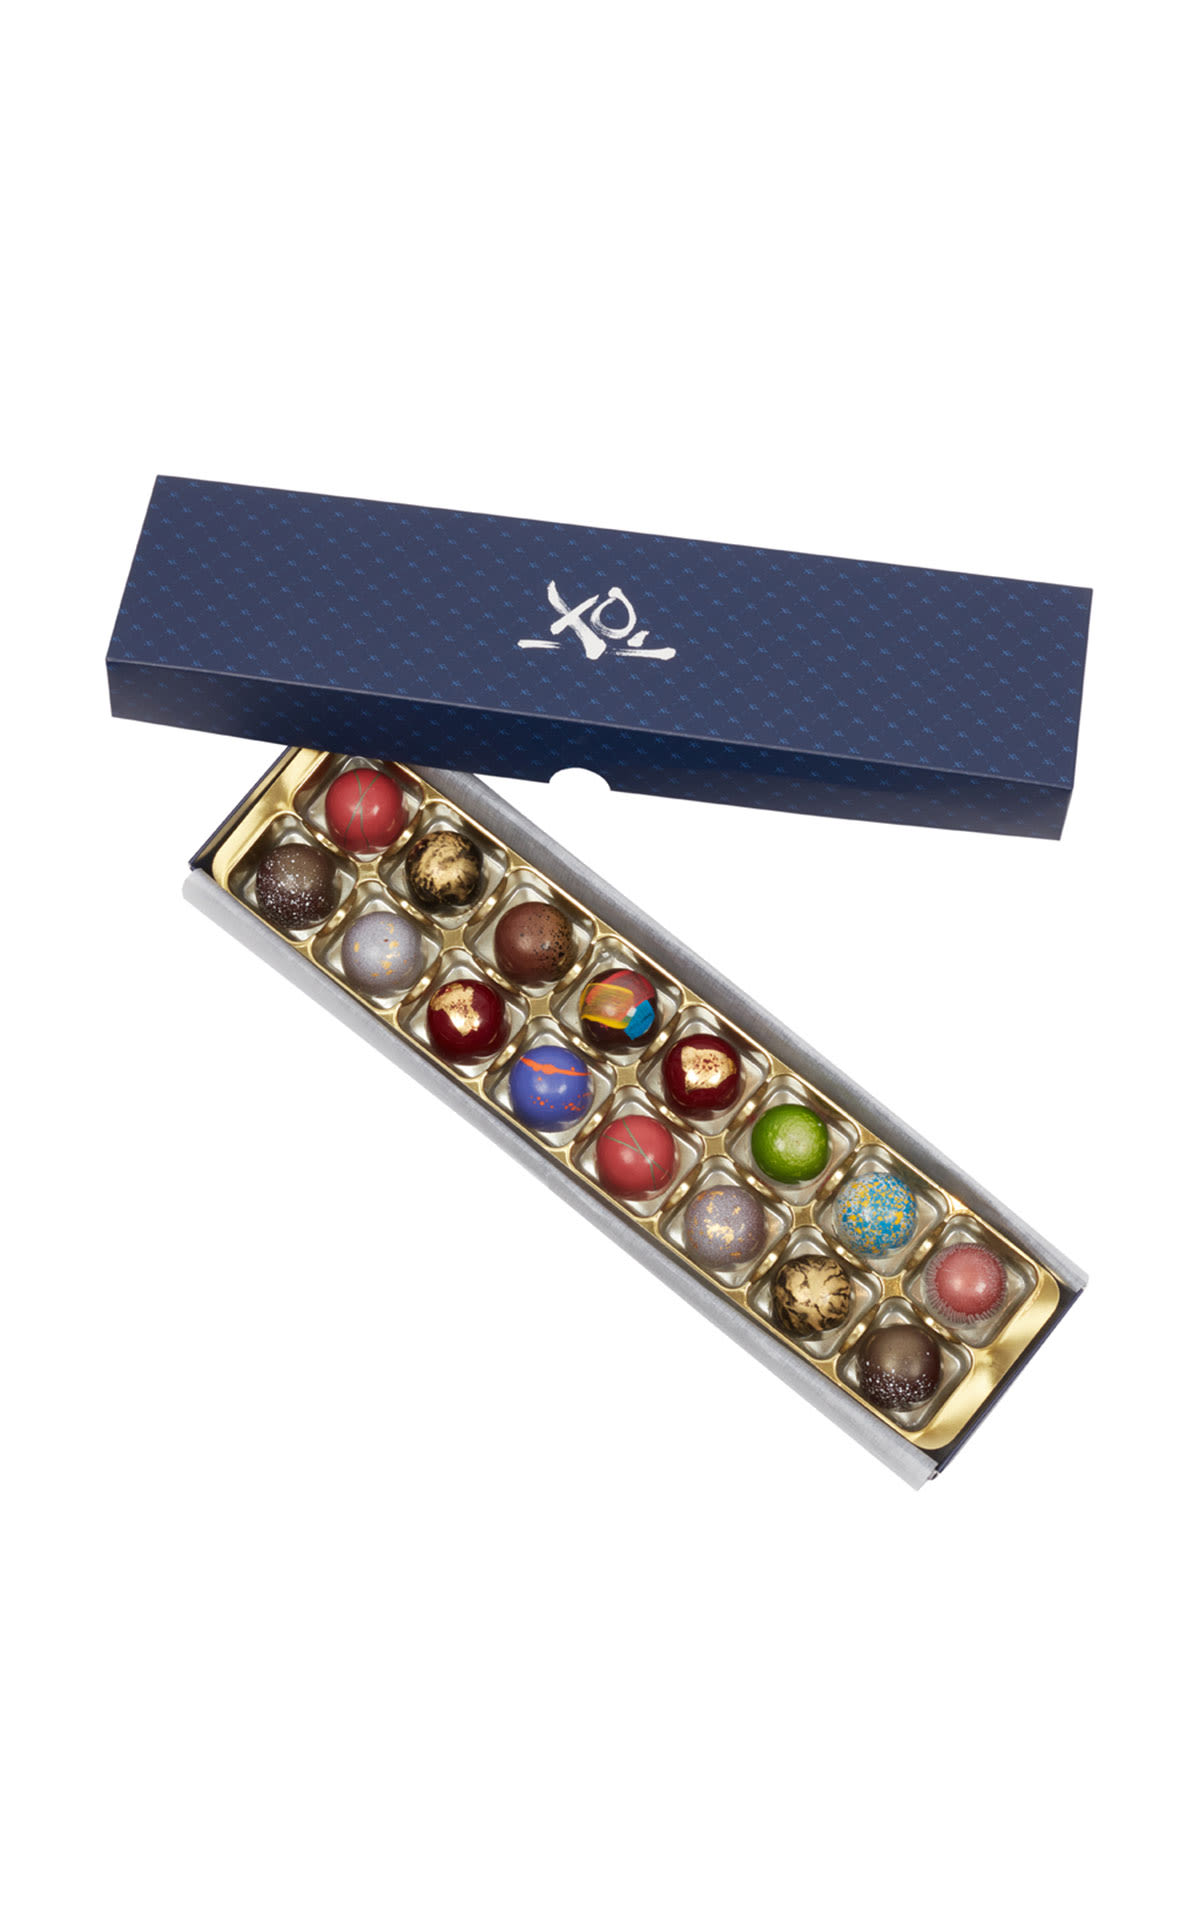 XO Chocolate XO collection 16 chocolate bon bons from Bicester Village